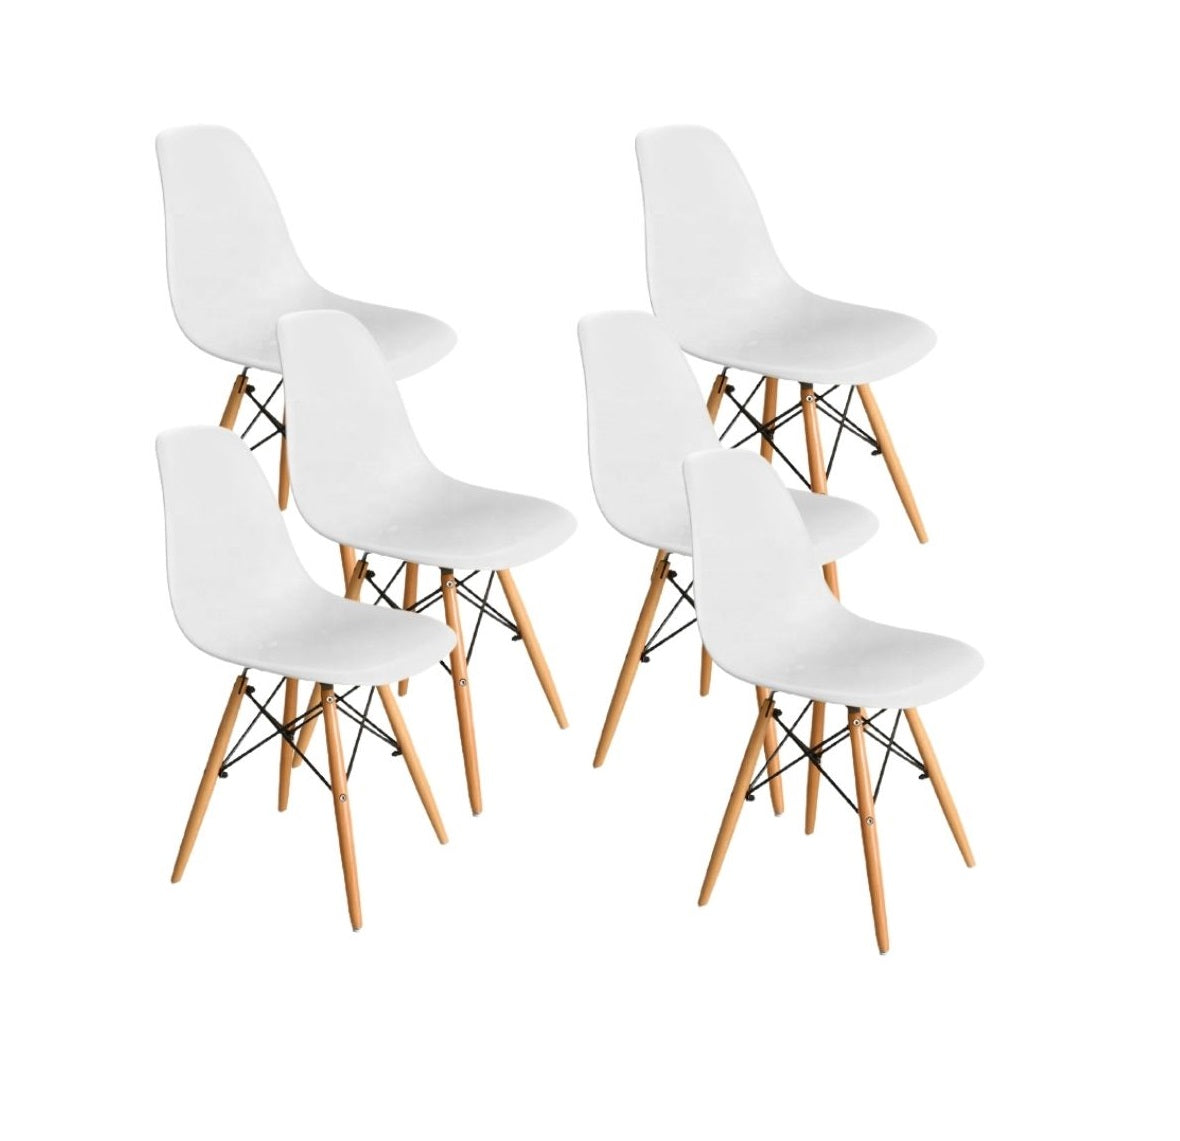 HV Scandinavian 6 Eames Chairs | HomeVibe PH | Buy Online Furniture and Home Furnishings